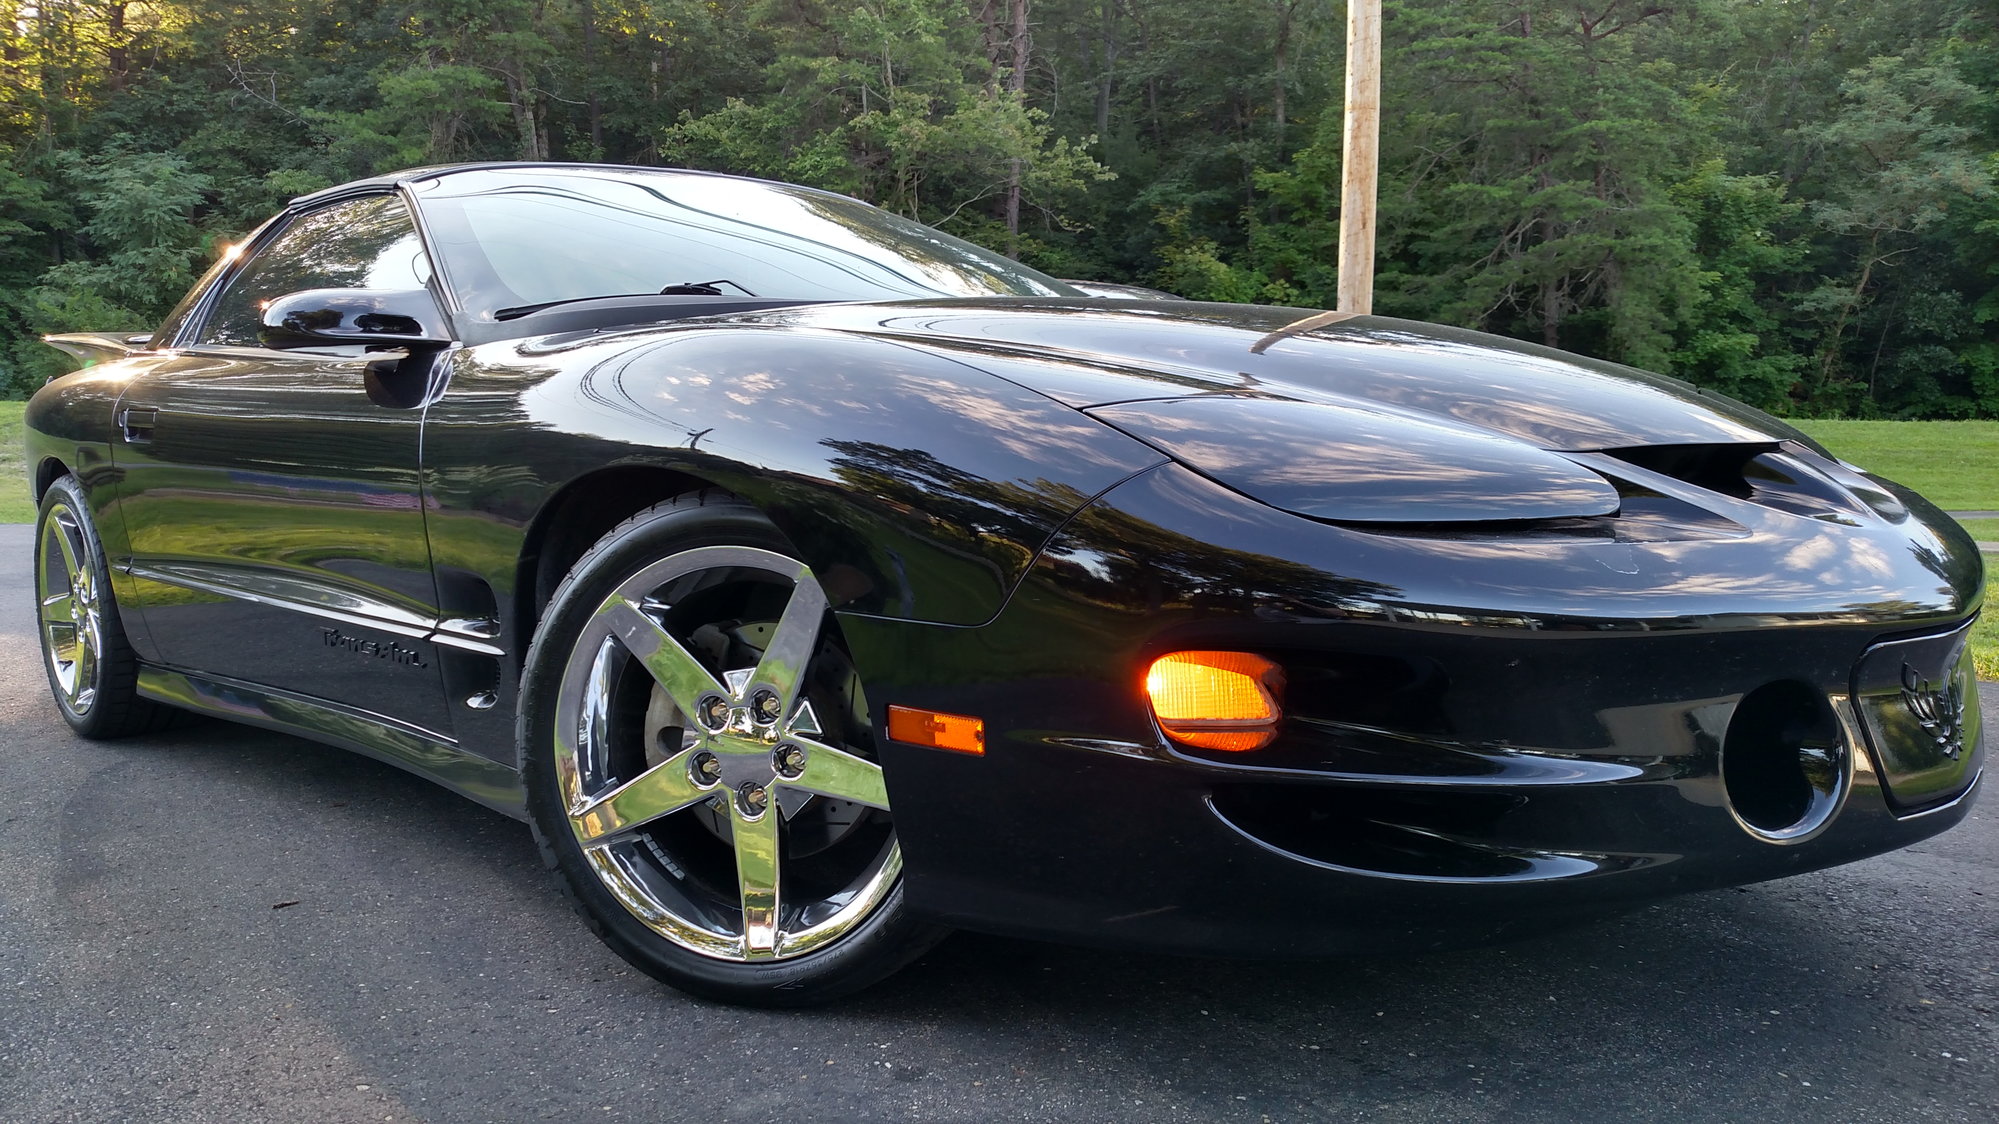 1999 Pontiac Firebird - 99 Trans Am 6spd. 75k miles - Used - VIN 2G2FV22G3X2200420 - 75,000 Miles - 8 cyl - 2WD - Manual - Coupe - Black - Chillocothe, OH 45601, United States